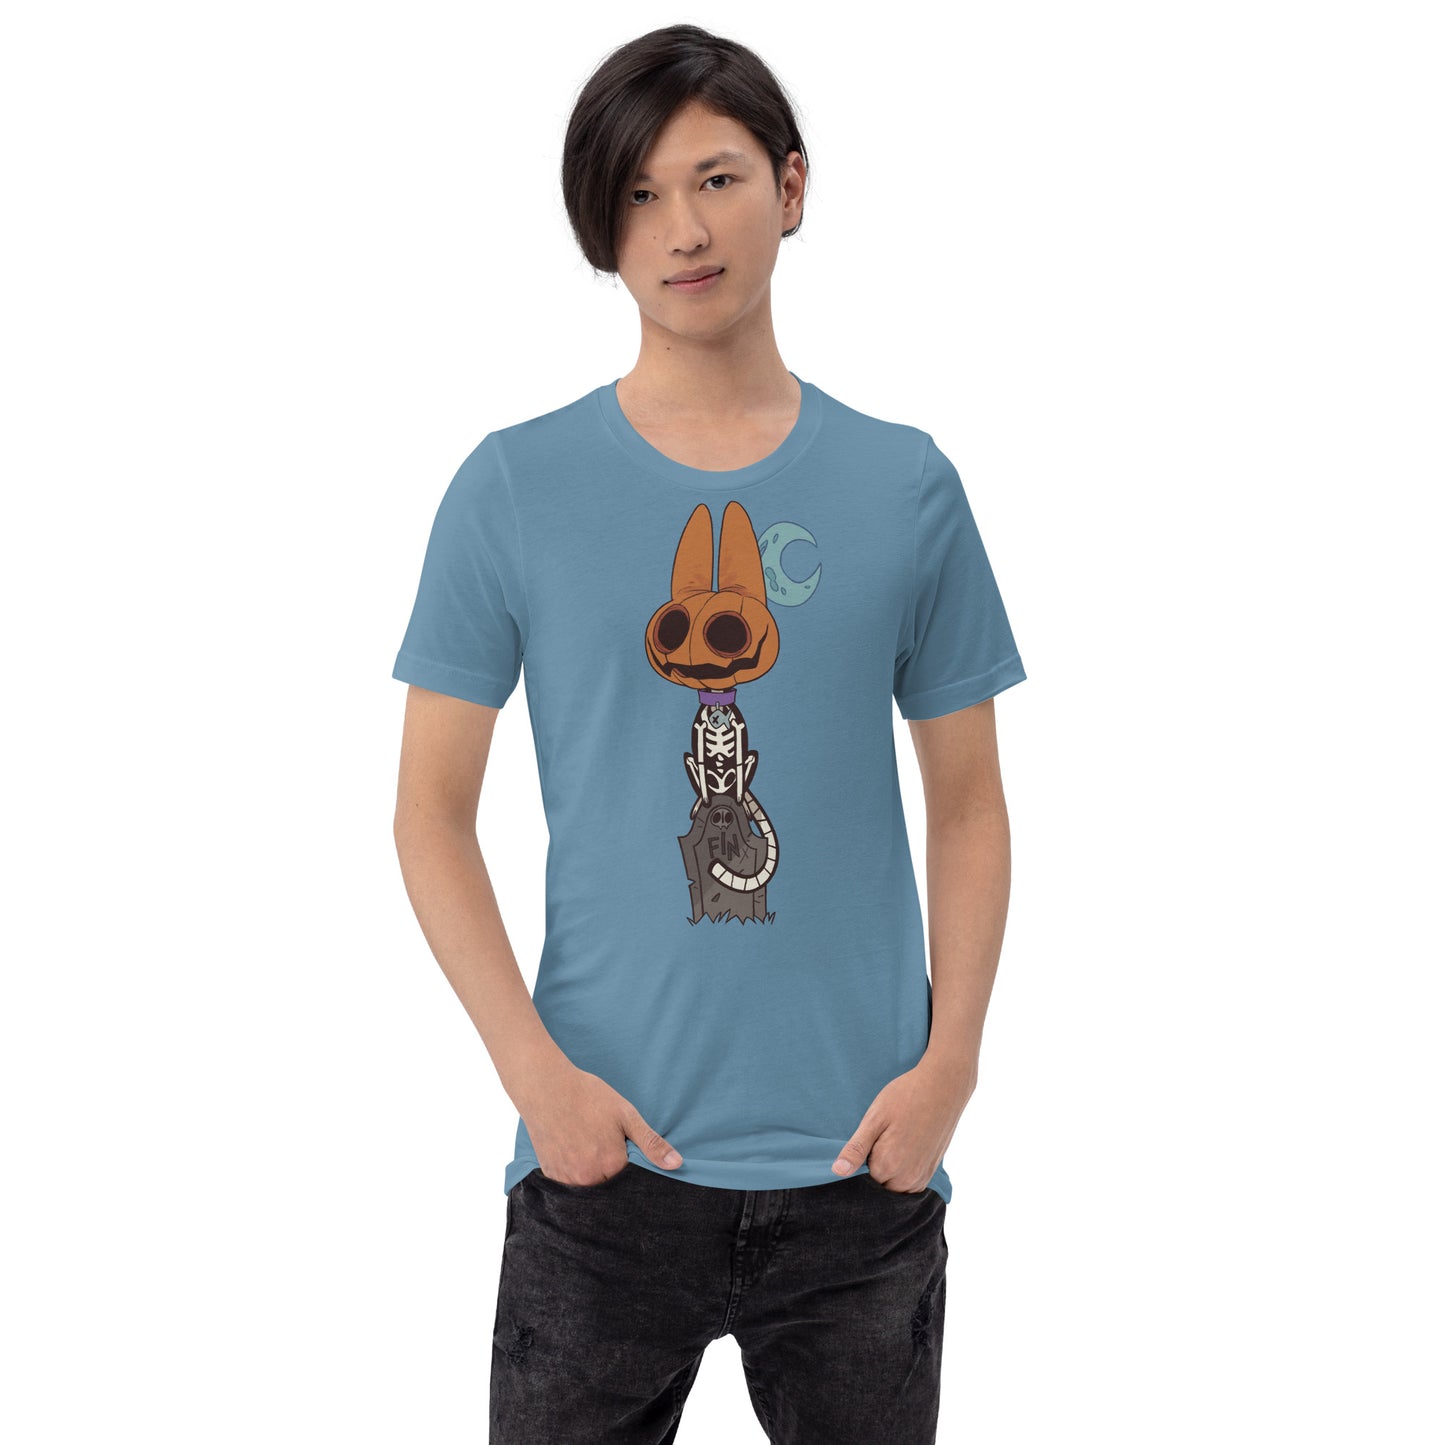 Finito on Grave Unisex T-Shirt